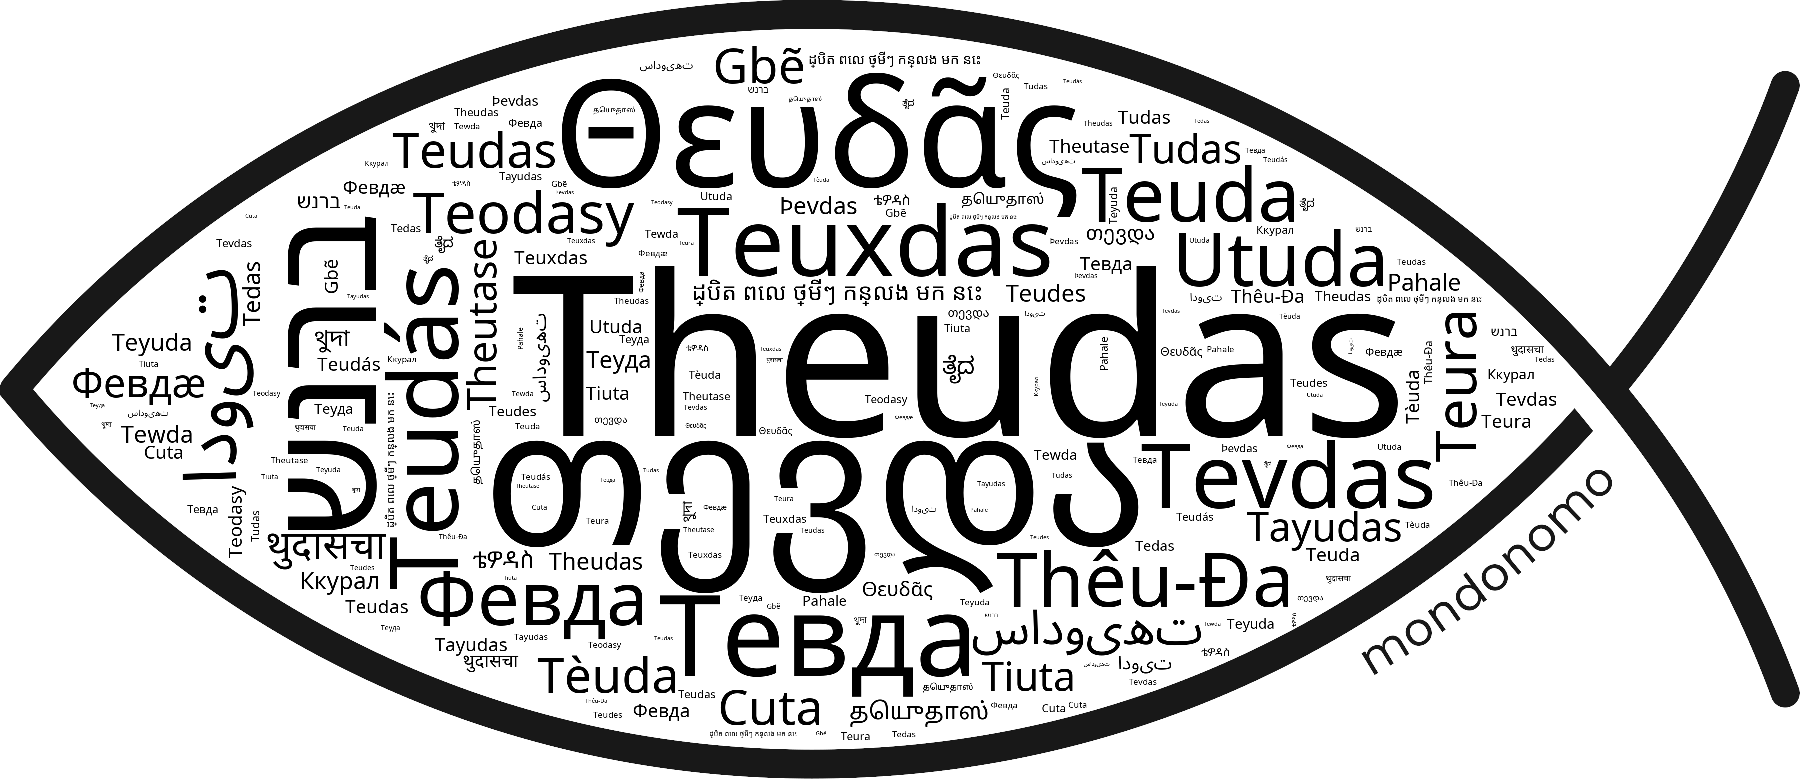 Name Theudas in the world's Bibles